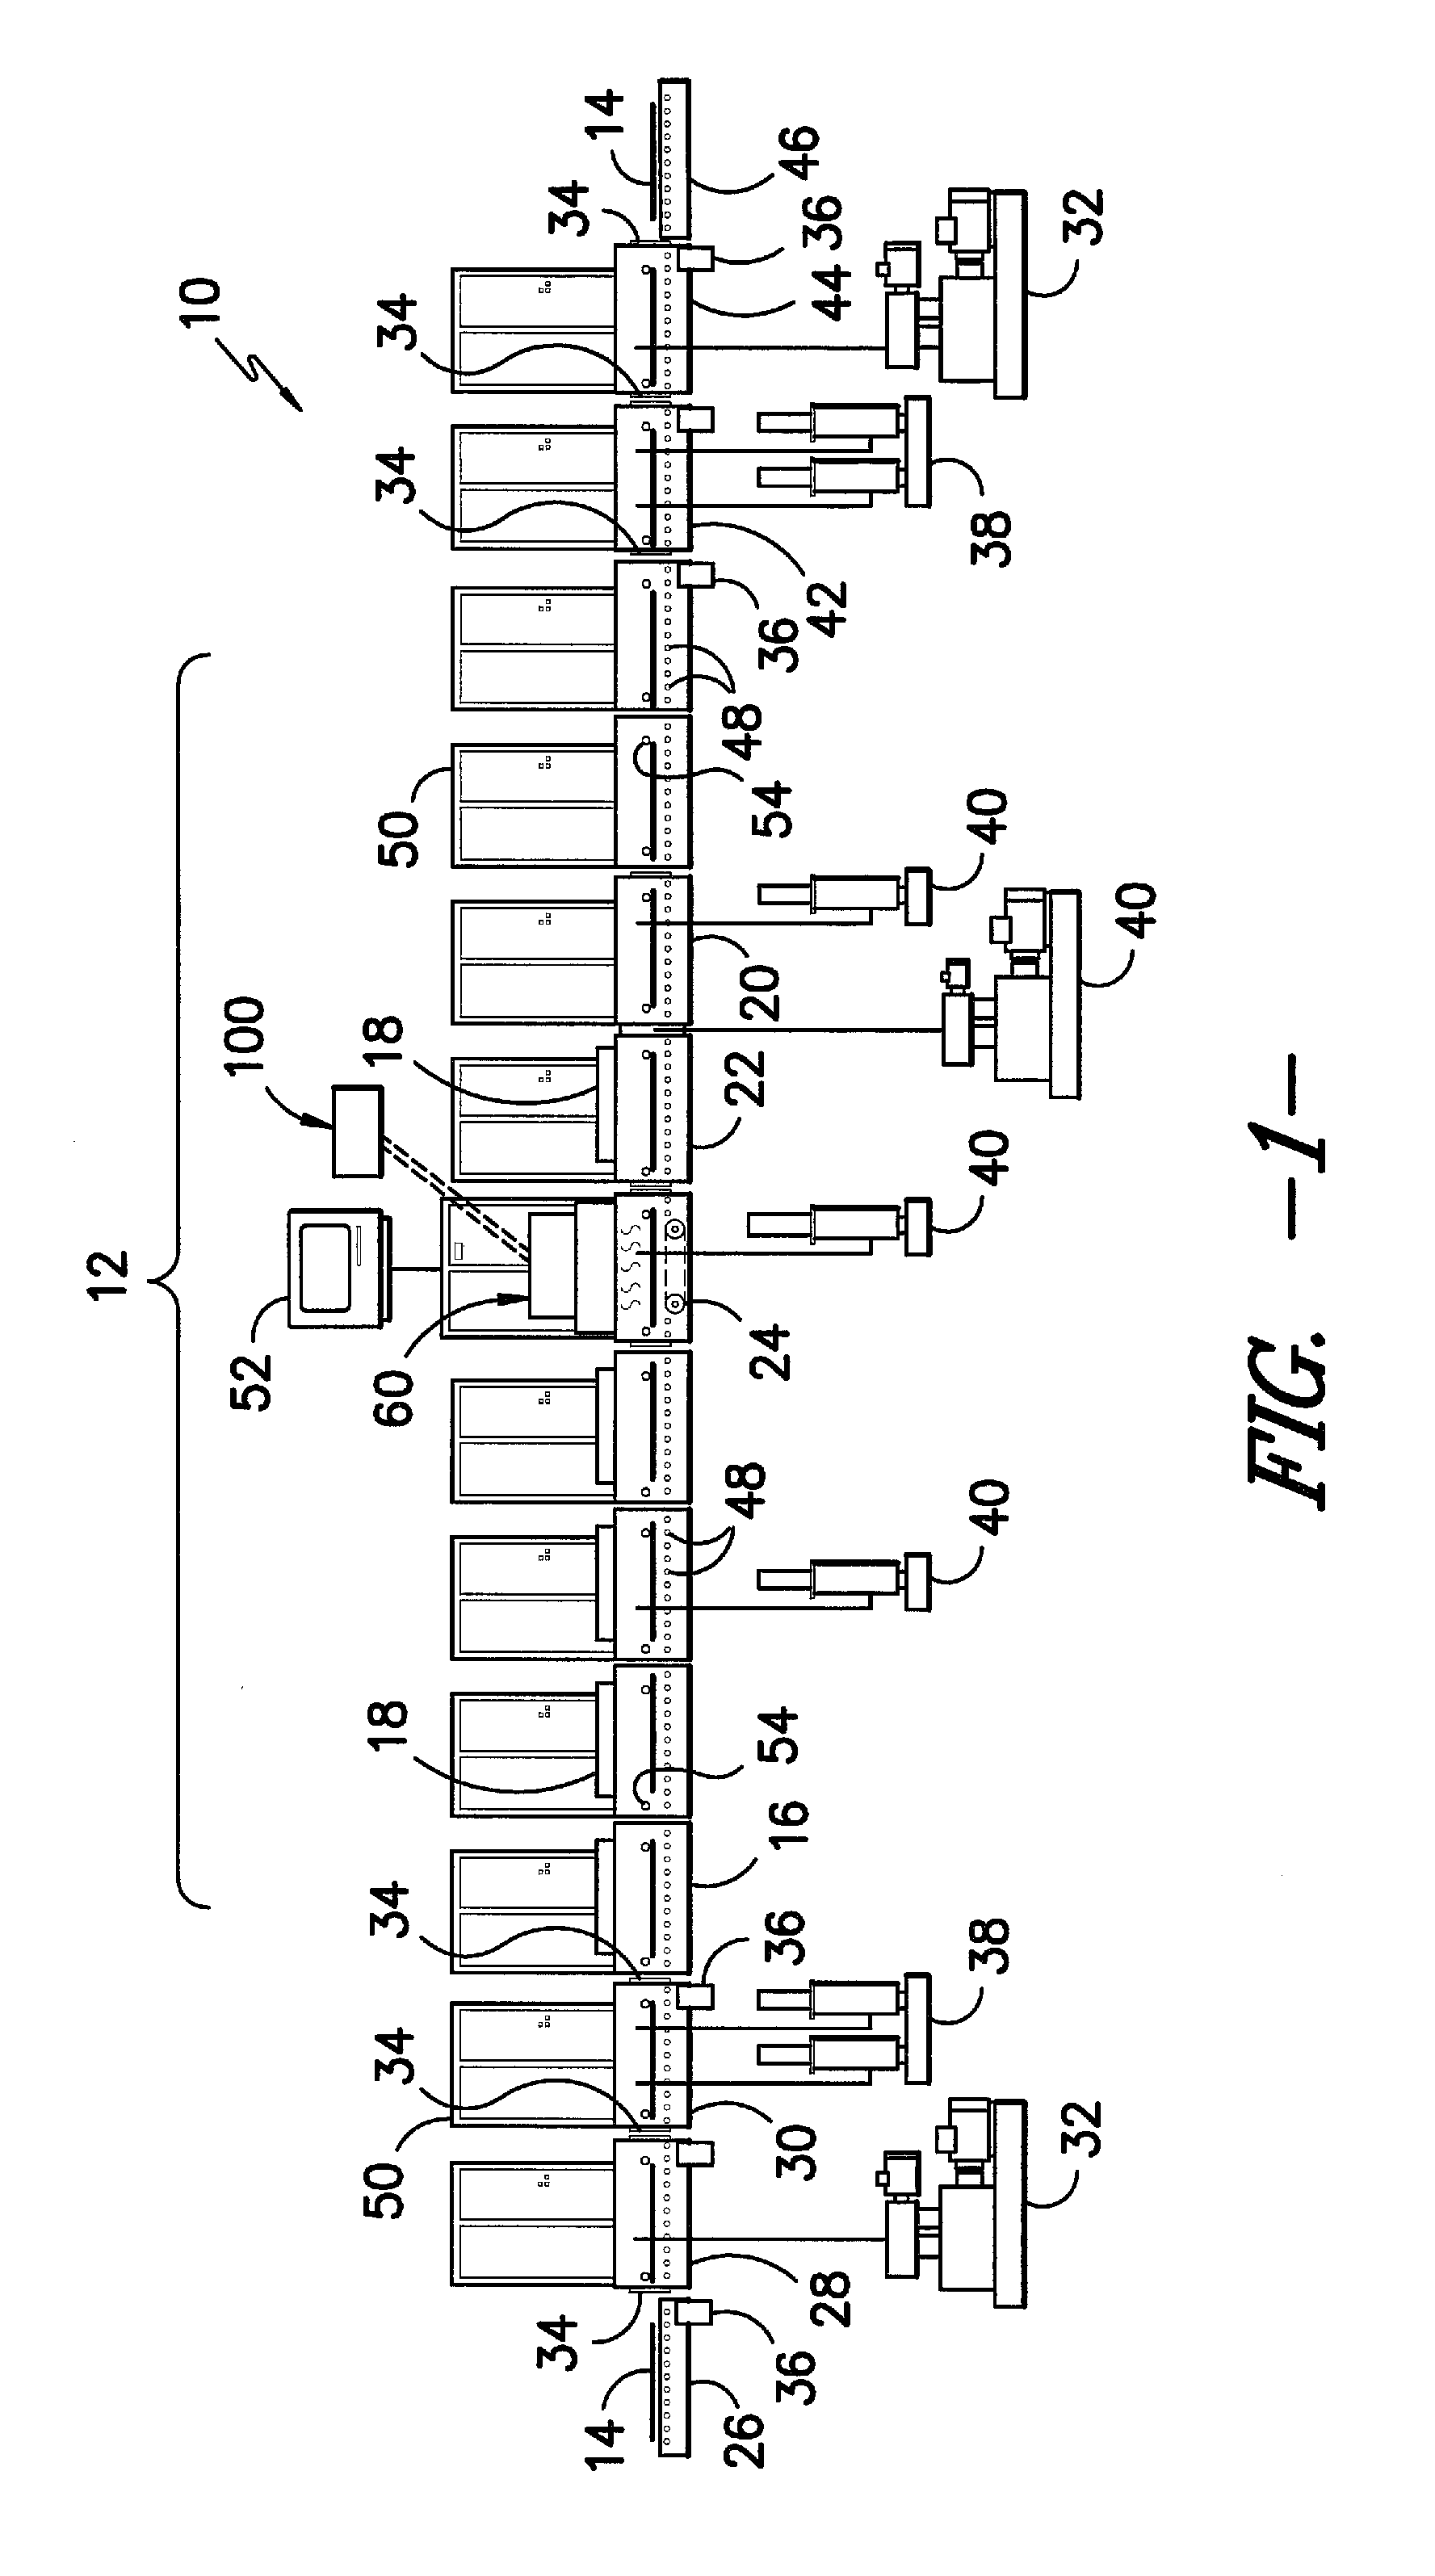 Automatic feed system and related process for introducing source material to a thin film vapor deposition system